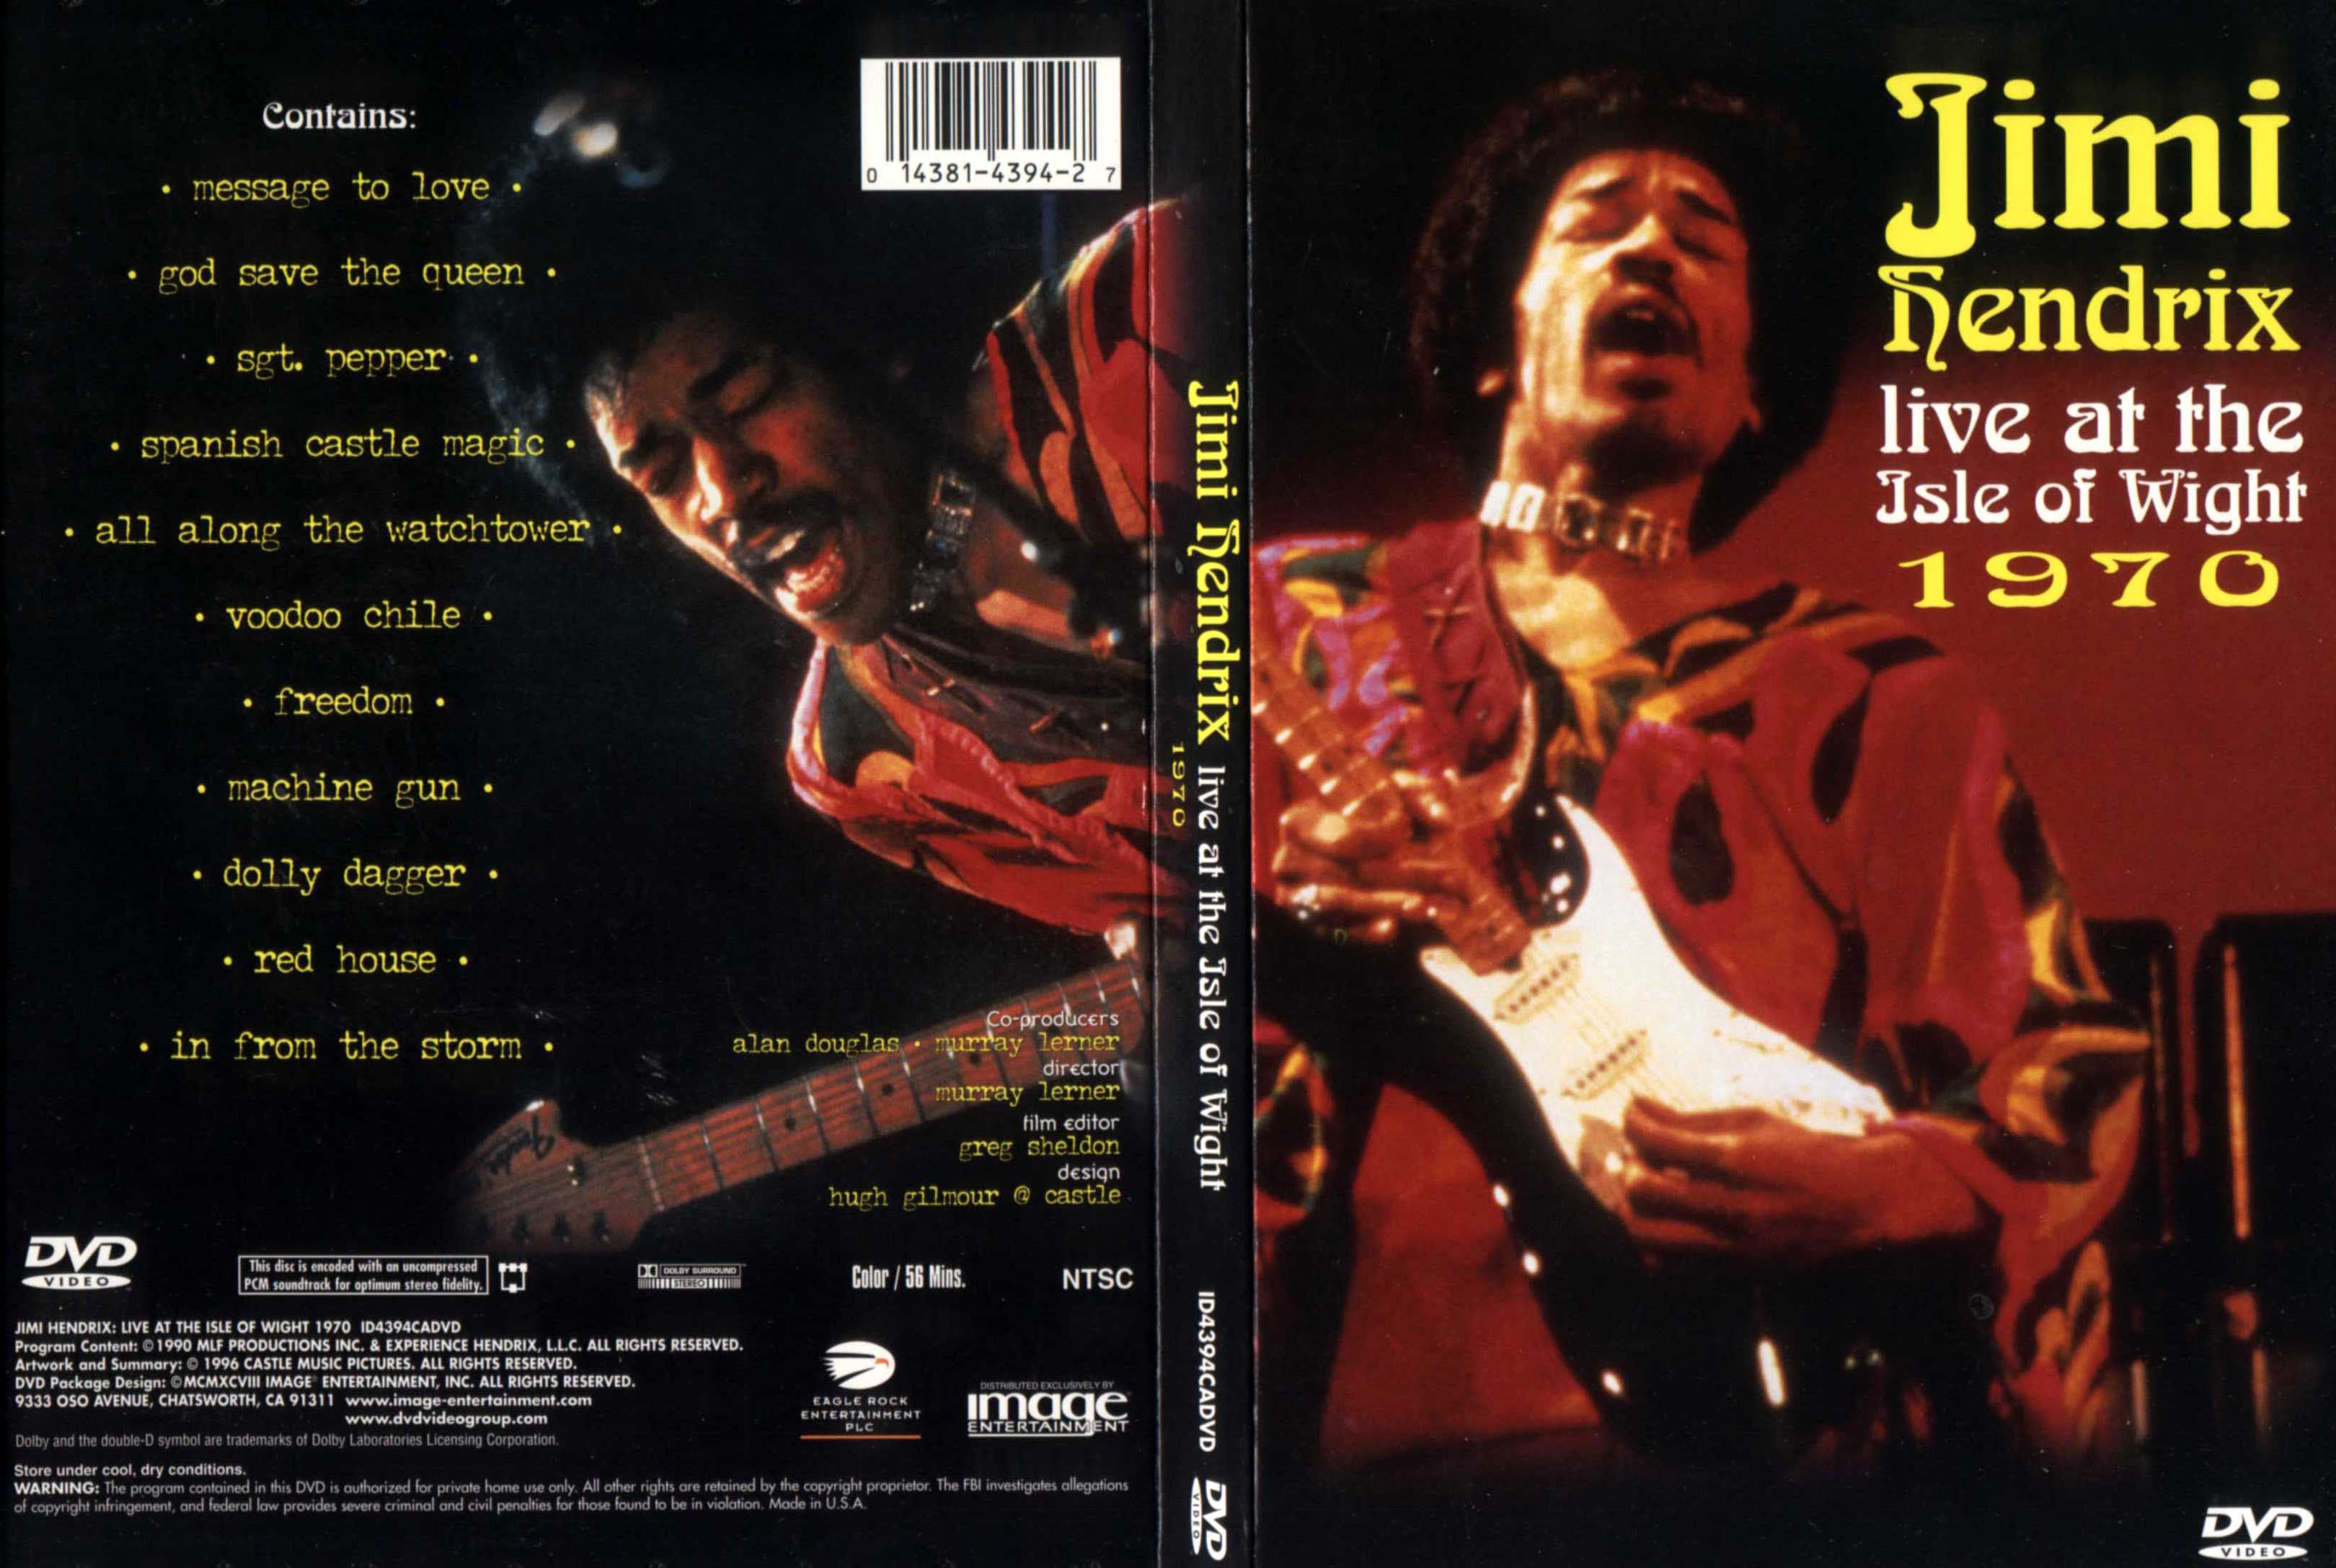 Jaquette DVD Jimi Hendrix live at the isle of wight 1970